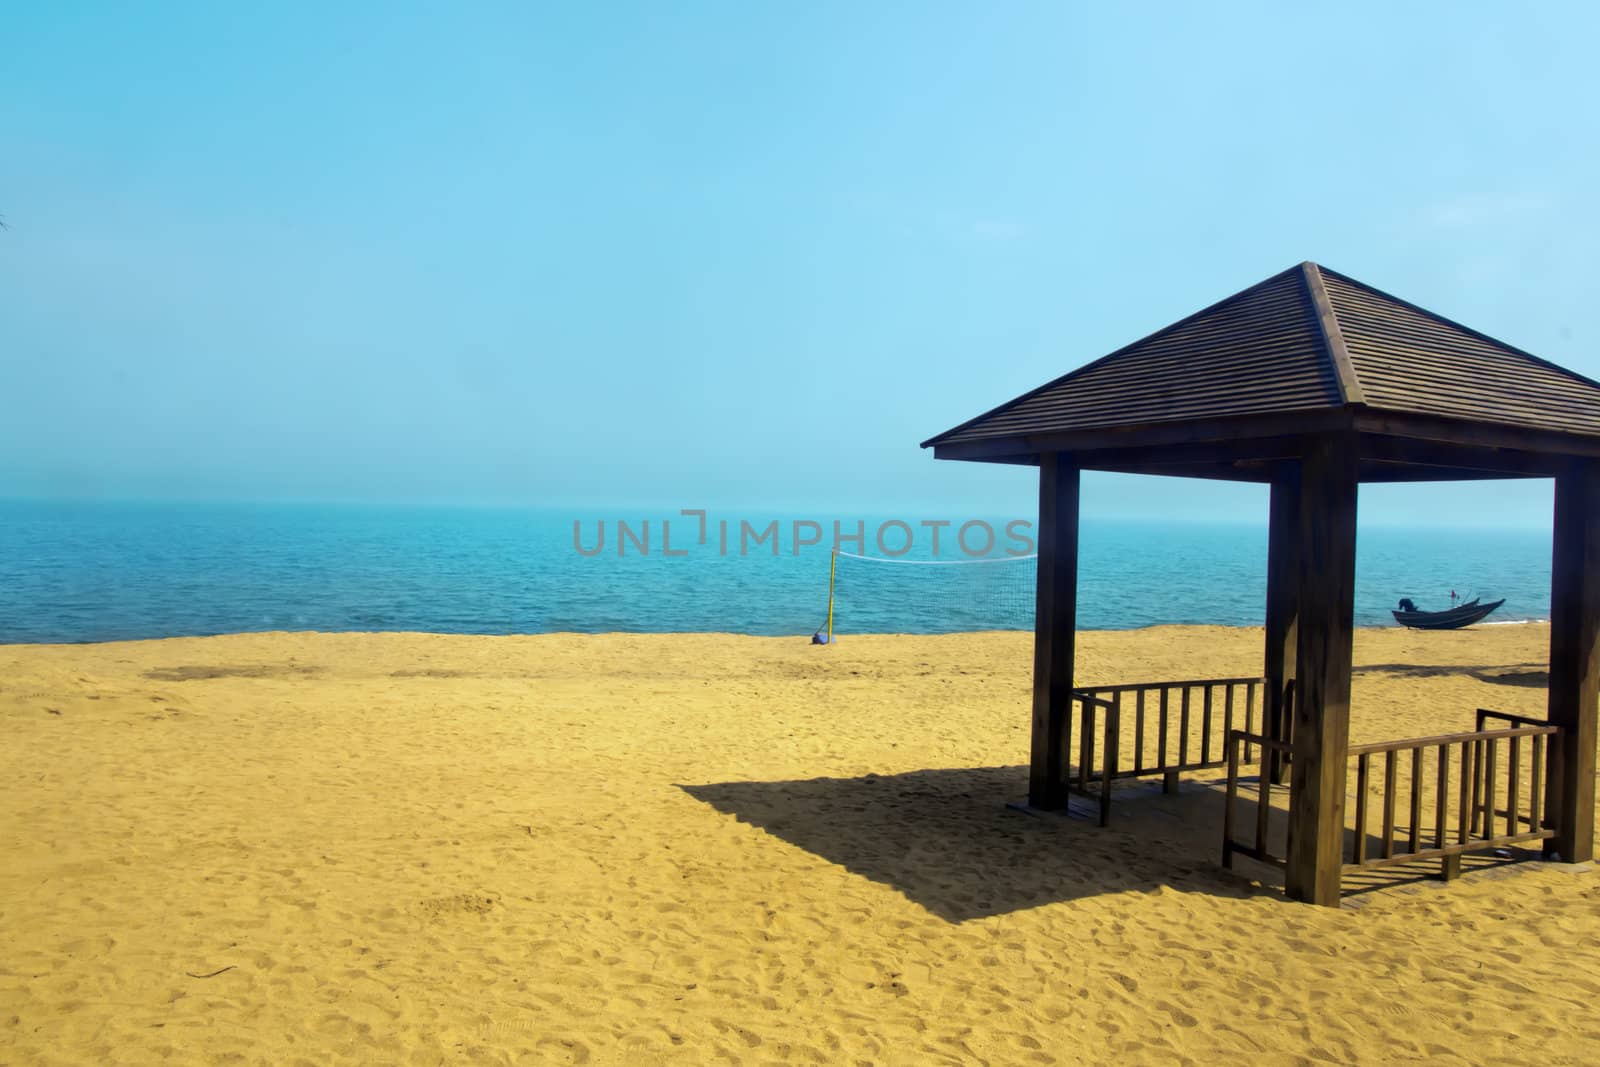 Sea beach casual background image by xfdly5